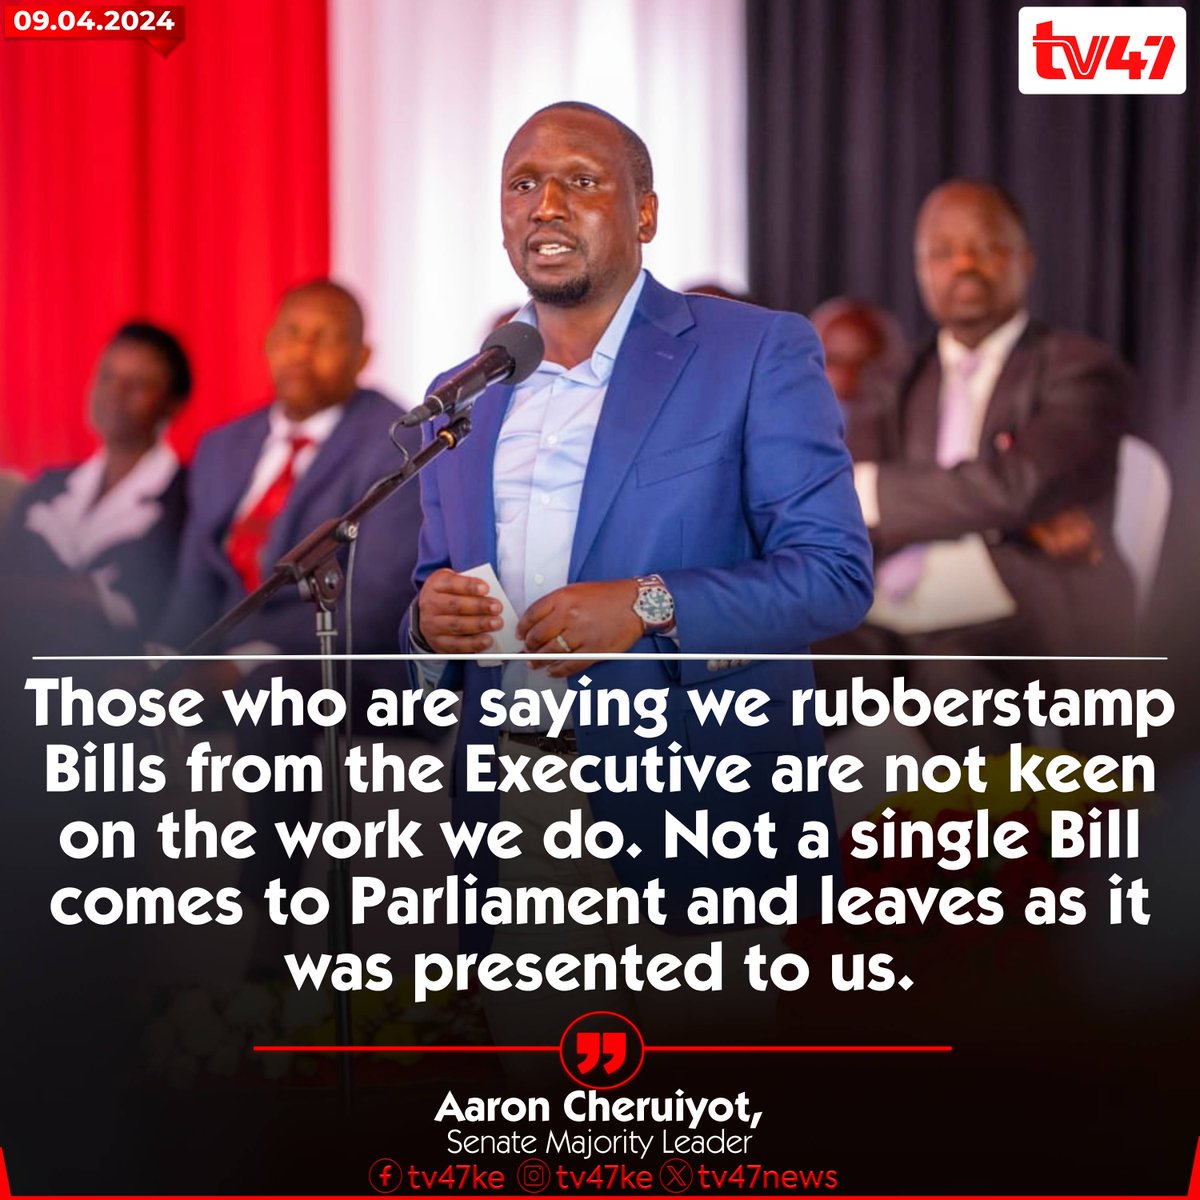 'Those who are saying we rubberstamp Bills from the Executive are not keen on the work we do,'- Aaron Cheruiyot, Senate Majority Leader